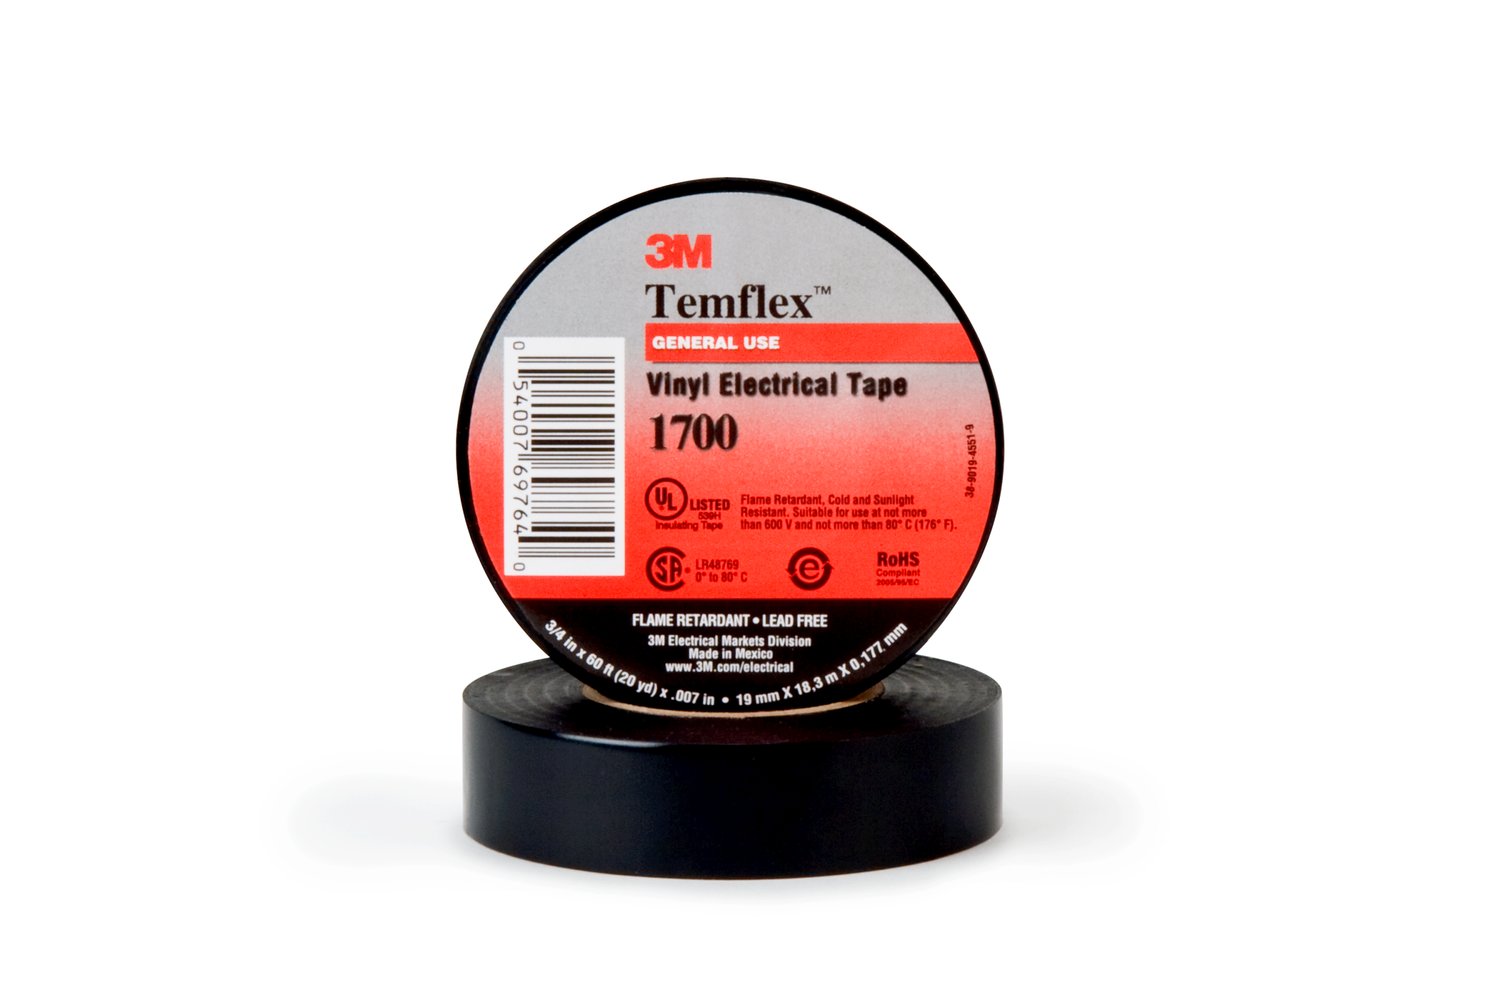 1" 3M Temflex 1700 Vinyl Electrical Tape with Non-Thermosetting Rubber Adhesive, black, 1" wide x  60 FT roll